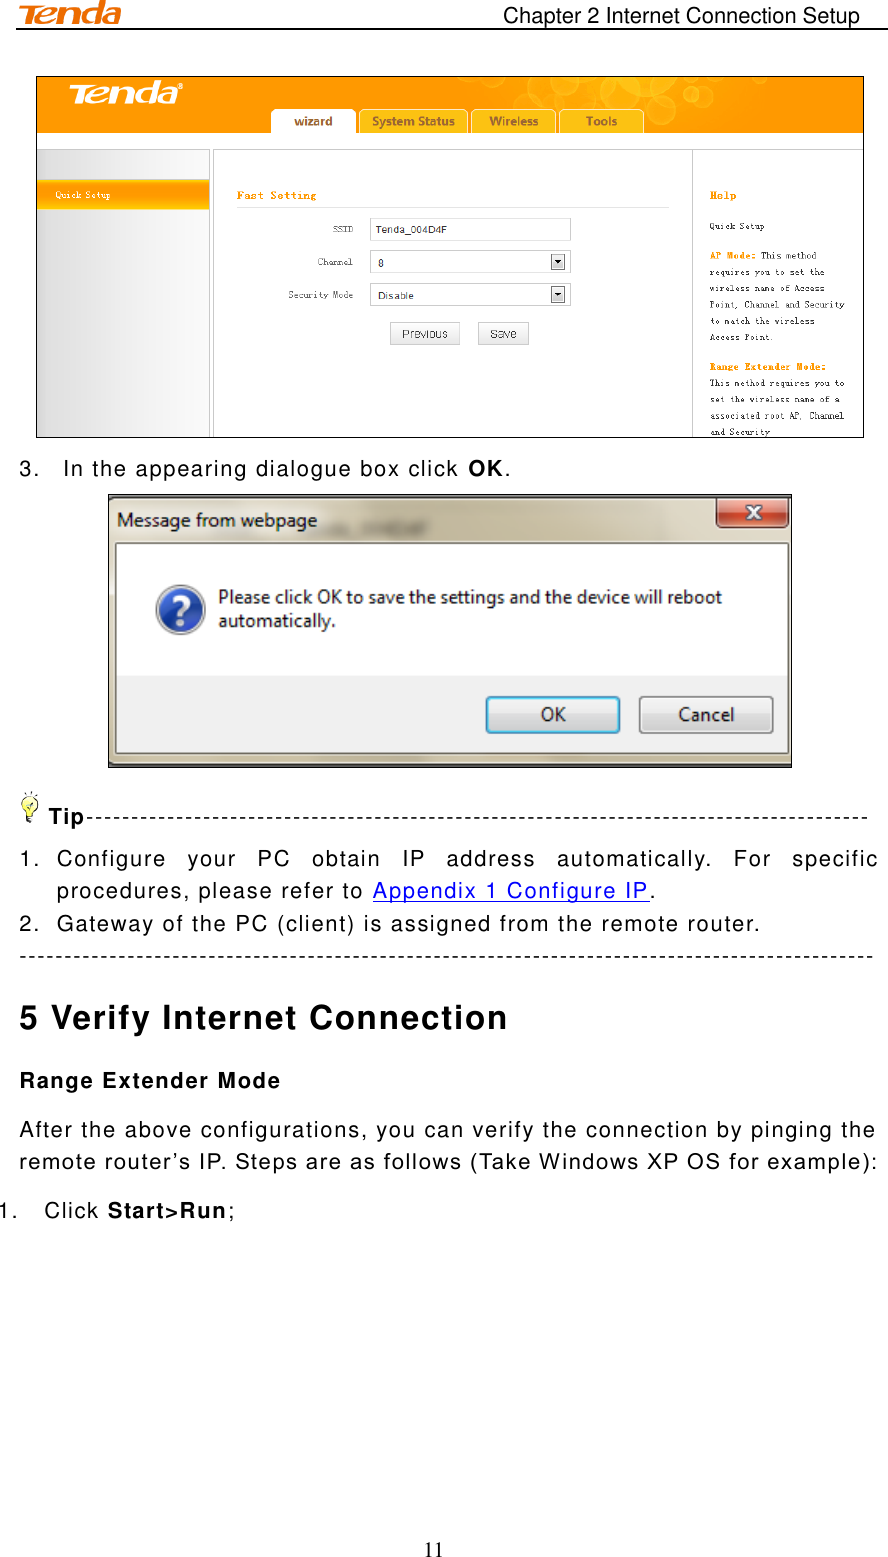                                                                       Chapter 2 Internet Connection Setup 11  3.  In the appearing dialogue box click OK.  Tip--------------------------------------------------------------------------------------- 1.  Configure  your  PC  obtain  IP  address  automatically.  For  specific procedures, please refer to Appendix 1 Configure IP. 2.  Gateway of the PC (client) is assigned from the remote router.   ----------------------------------------------------------------------------------------------- 5 Verify Internet Connection Range Extender Mode After the above configurations, you can verify the connection by pinging the remote router ’s IP. Steps are as follows (Take Windows XP OS for example):  1.  Click Start&gt;Run; 